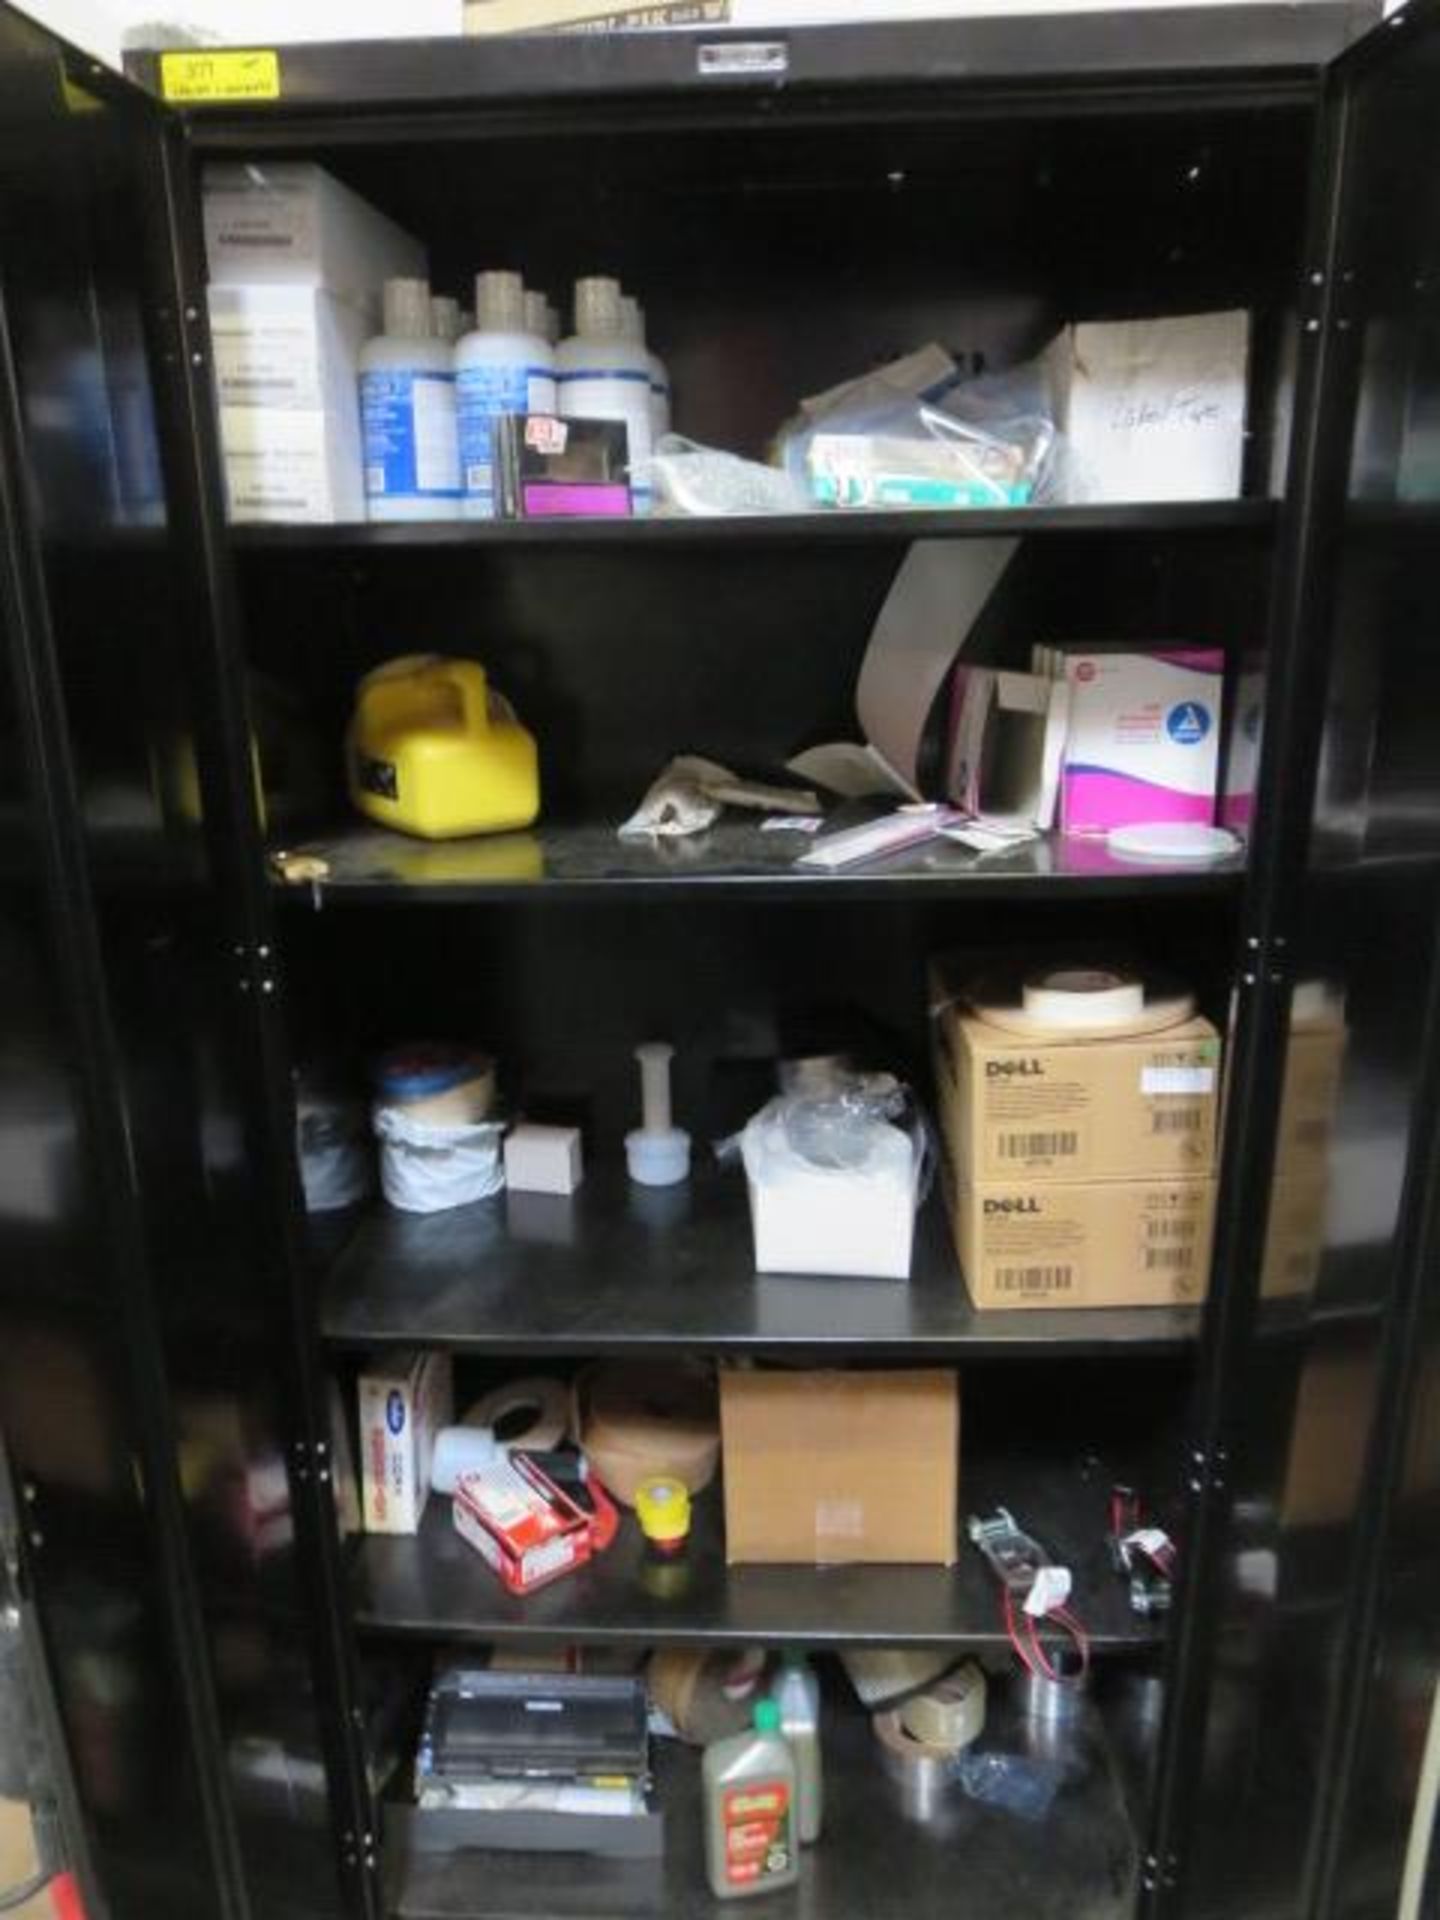 2 Door Metal Cabinet, Includes Contents Consisting of Supplies, Eye Wash, Toner and More - Image 2 of 2